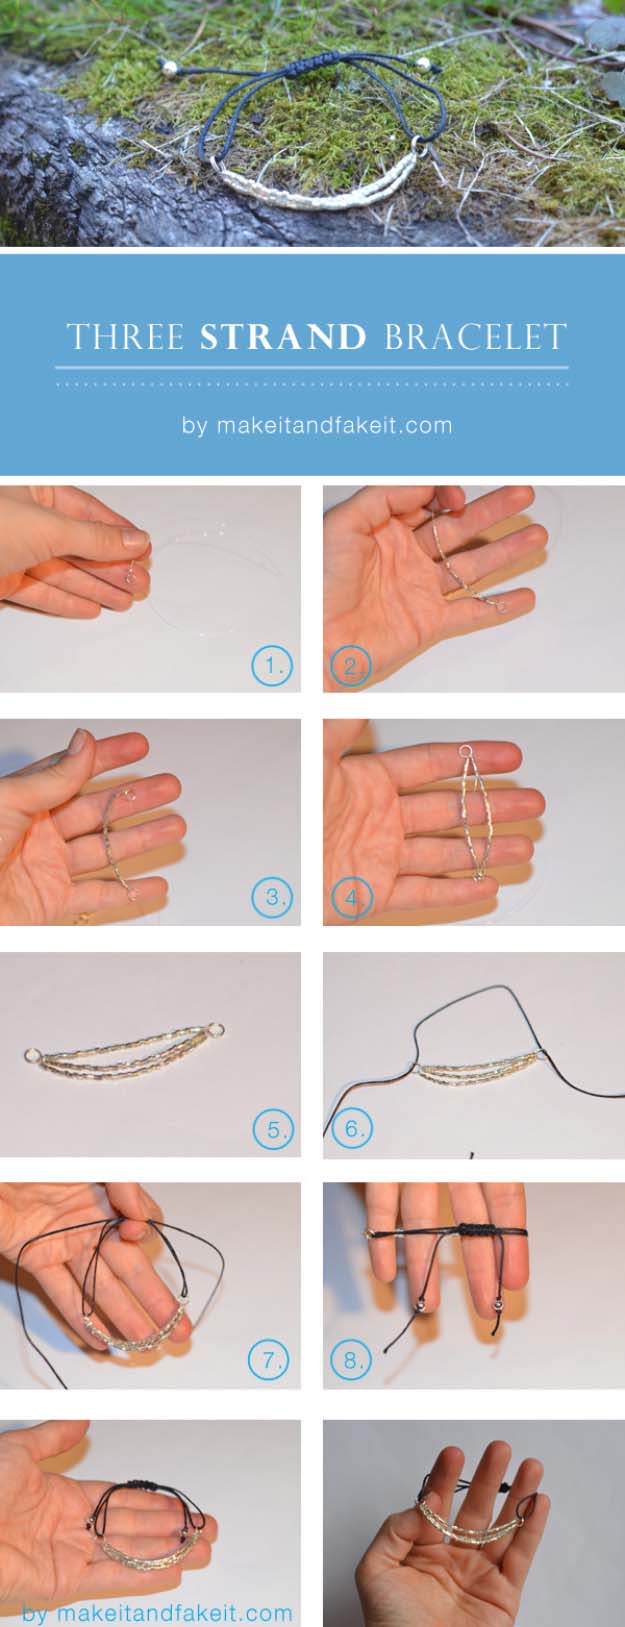 Fun DIY Jewelry Ideas | Cool Homemade Jewelry Tutorials for Adults and Teens | Awesome Bracelets, Necklaces, Earrings and Accessories You Can Make At Home | The Three Strand Bracelet 